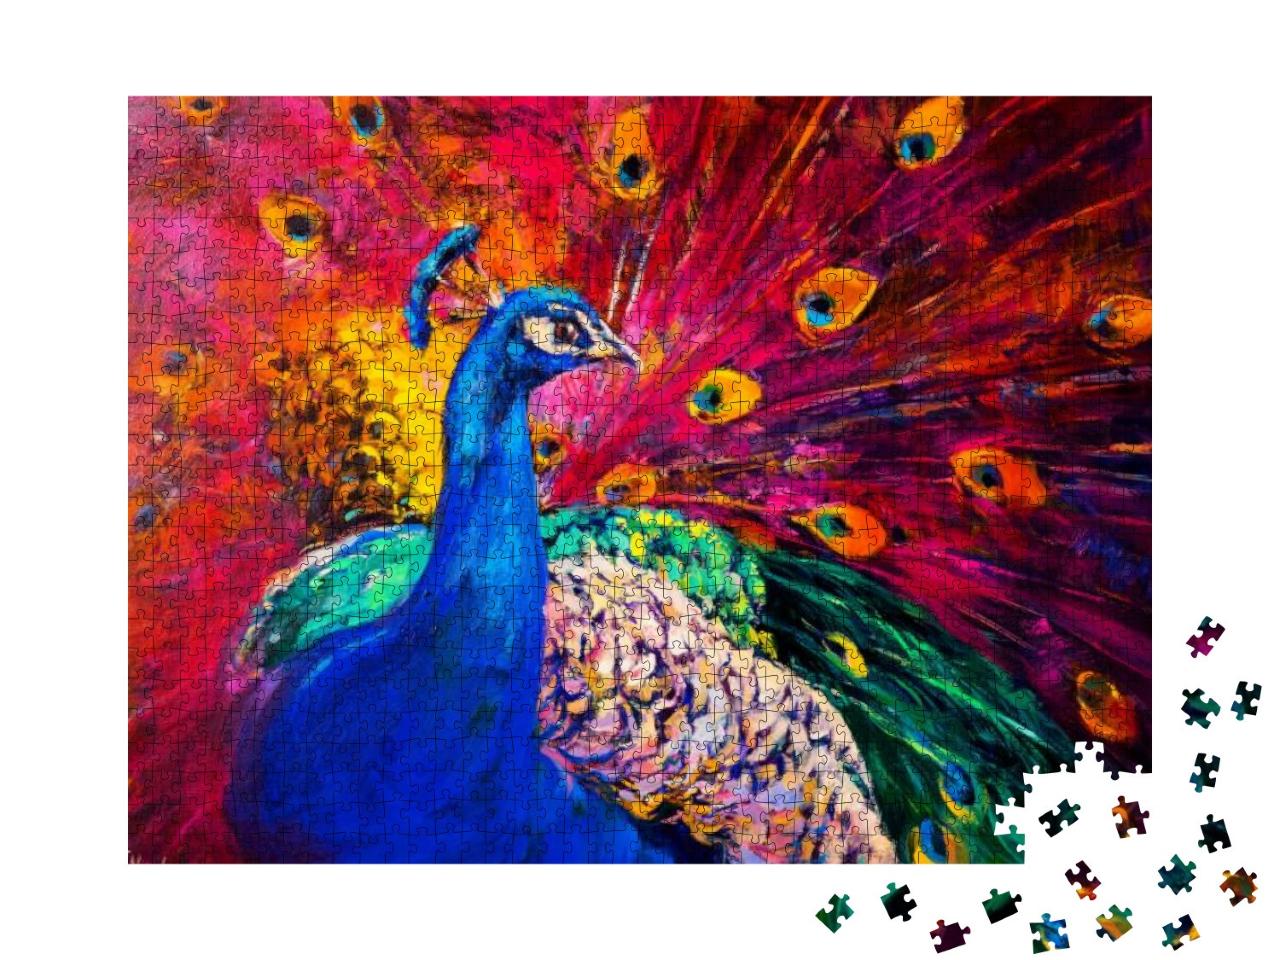 Original Oil Painting on Canvas. Beautiful Multicolored P... Jigsaw Puzzle with 1000 pieces